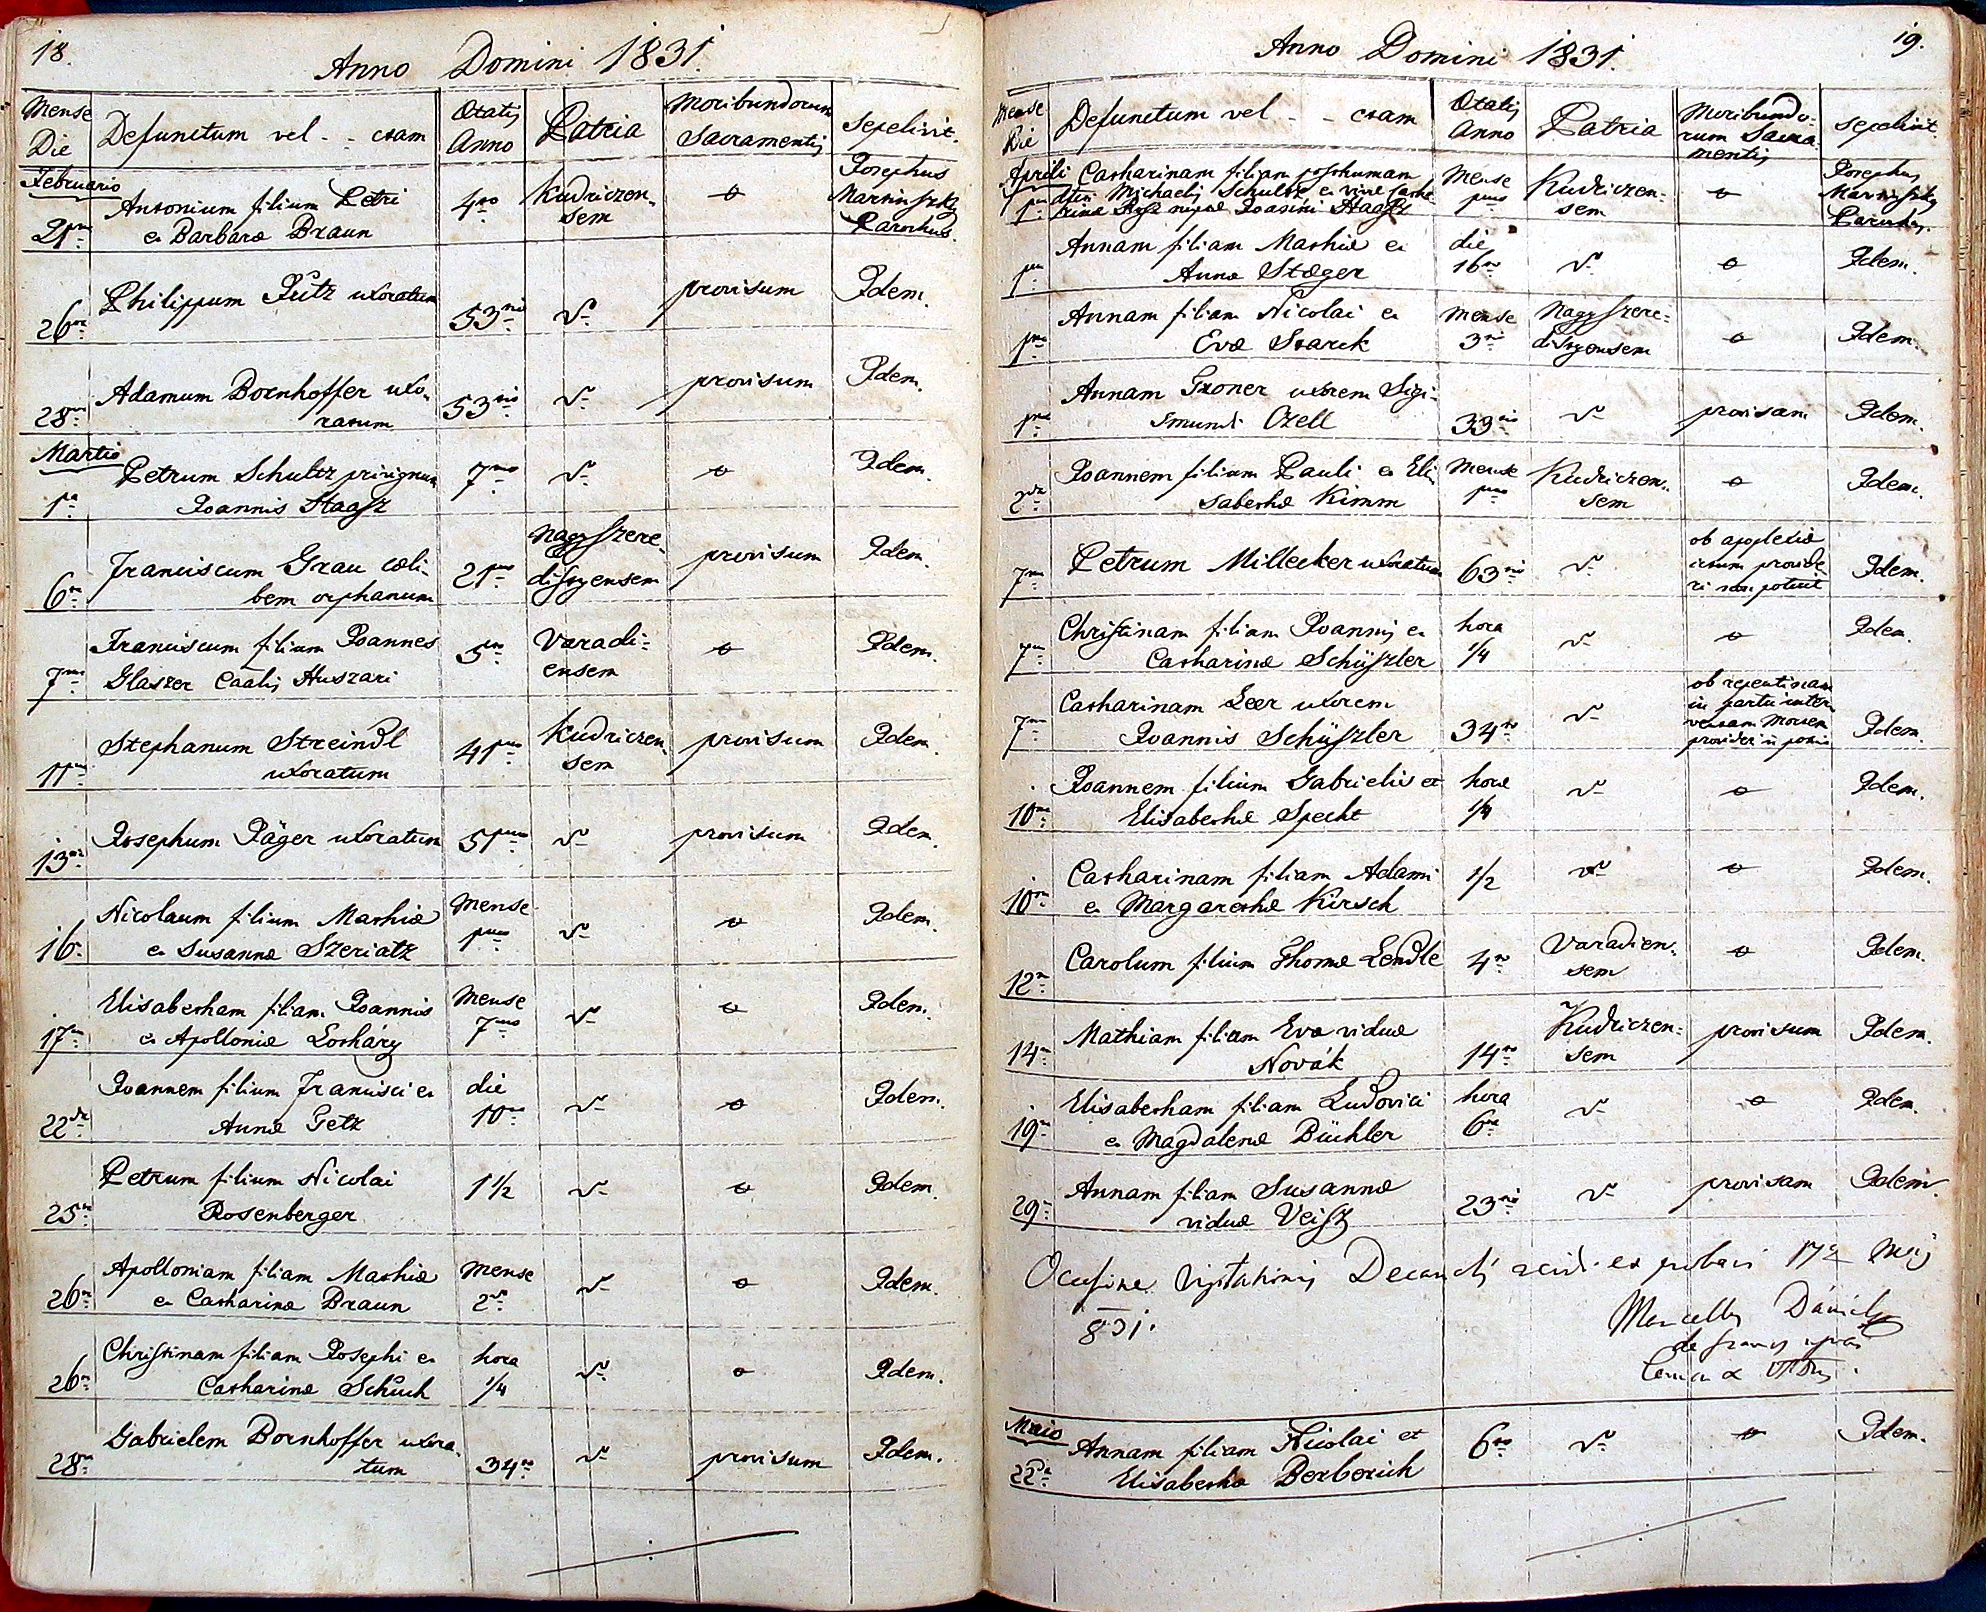 images/church_records/DEATHS/1829-1851D/018 i 019